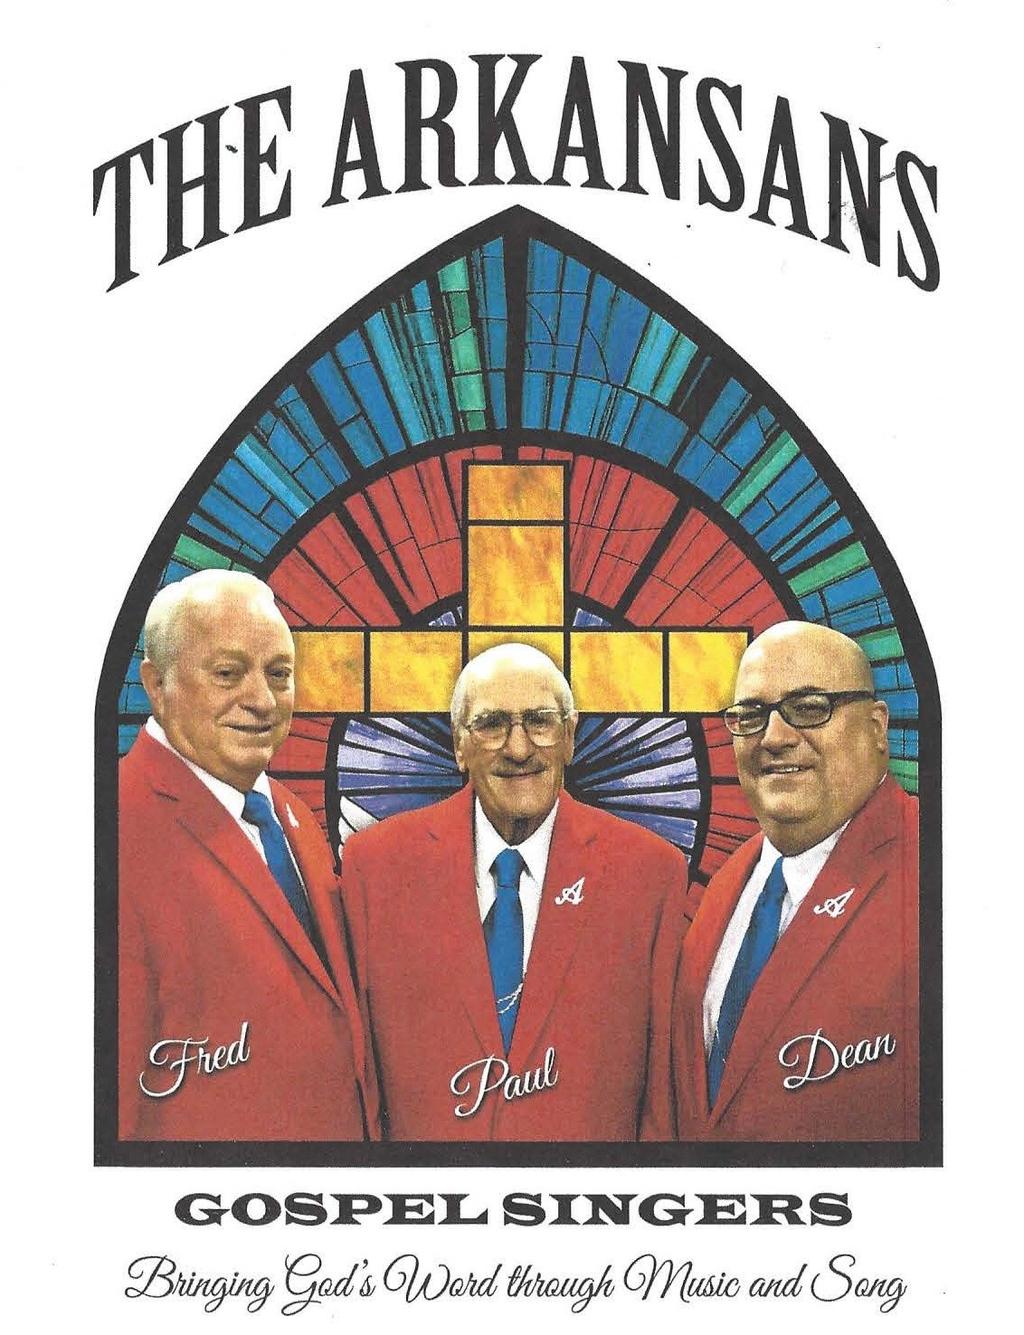 The Arkansans are now scheduling their 2019 year concerts dates and will focus only on Sunday evening services. Twelve concerts dates will be offered on Sunday evening.